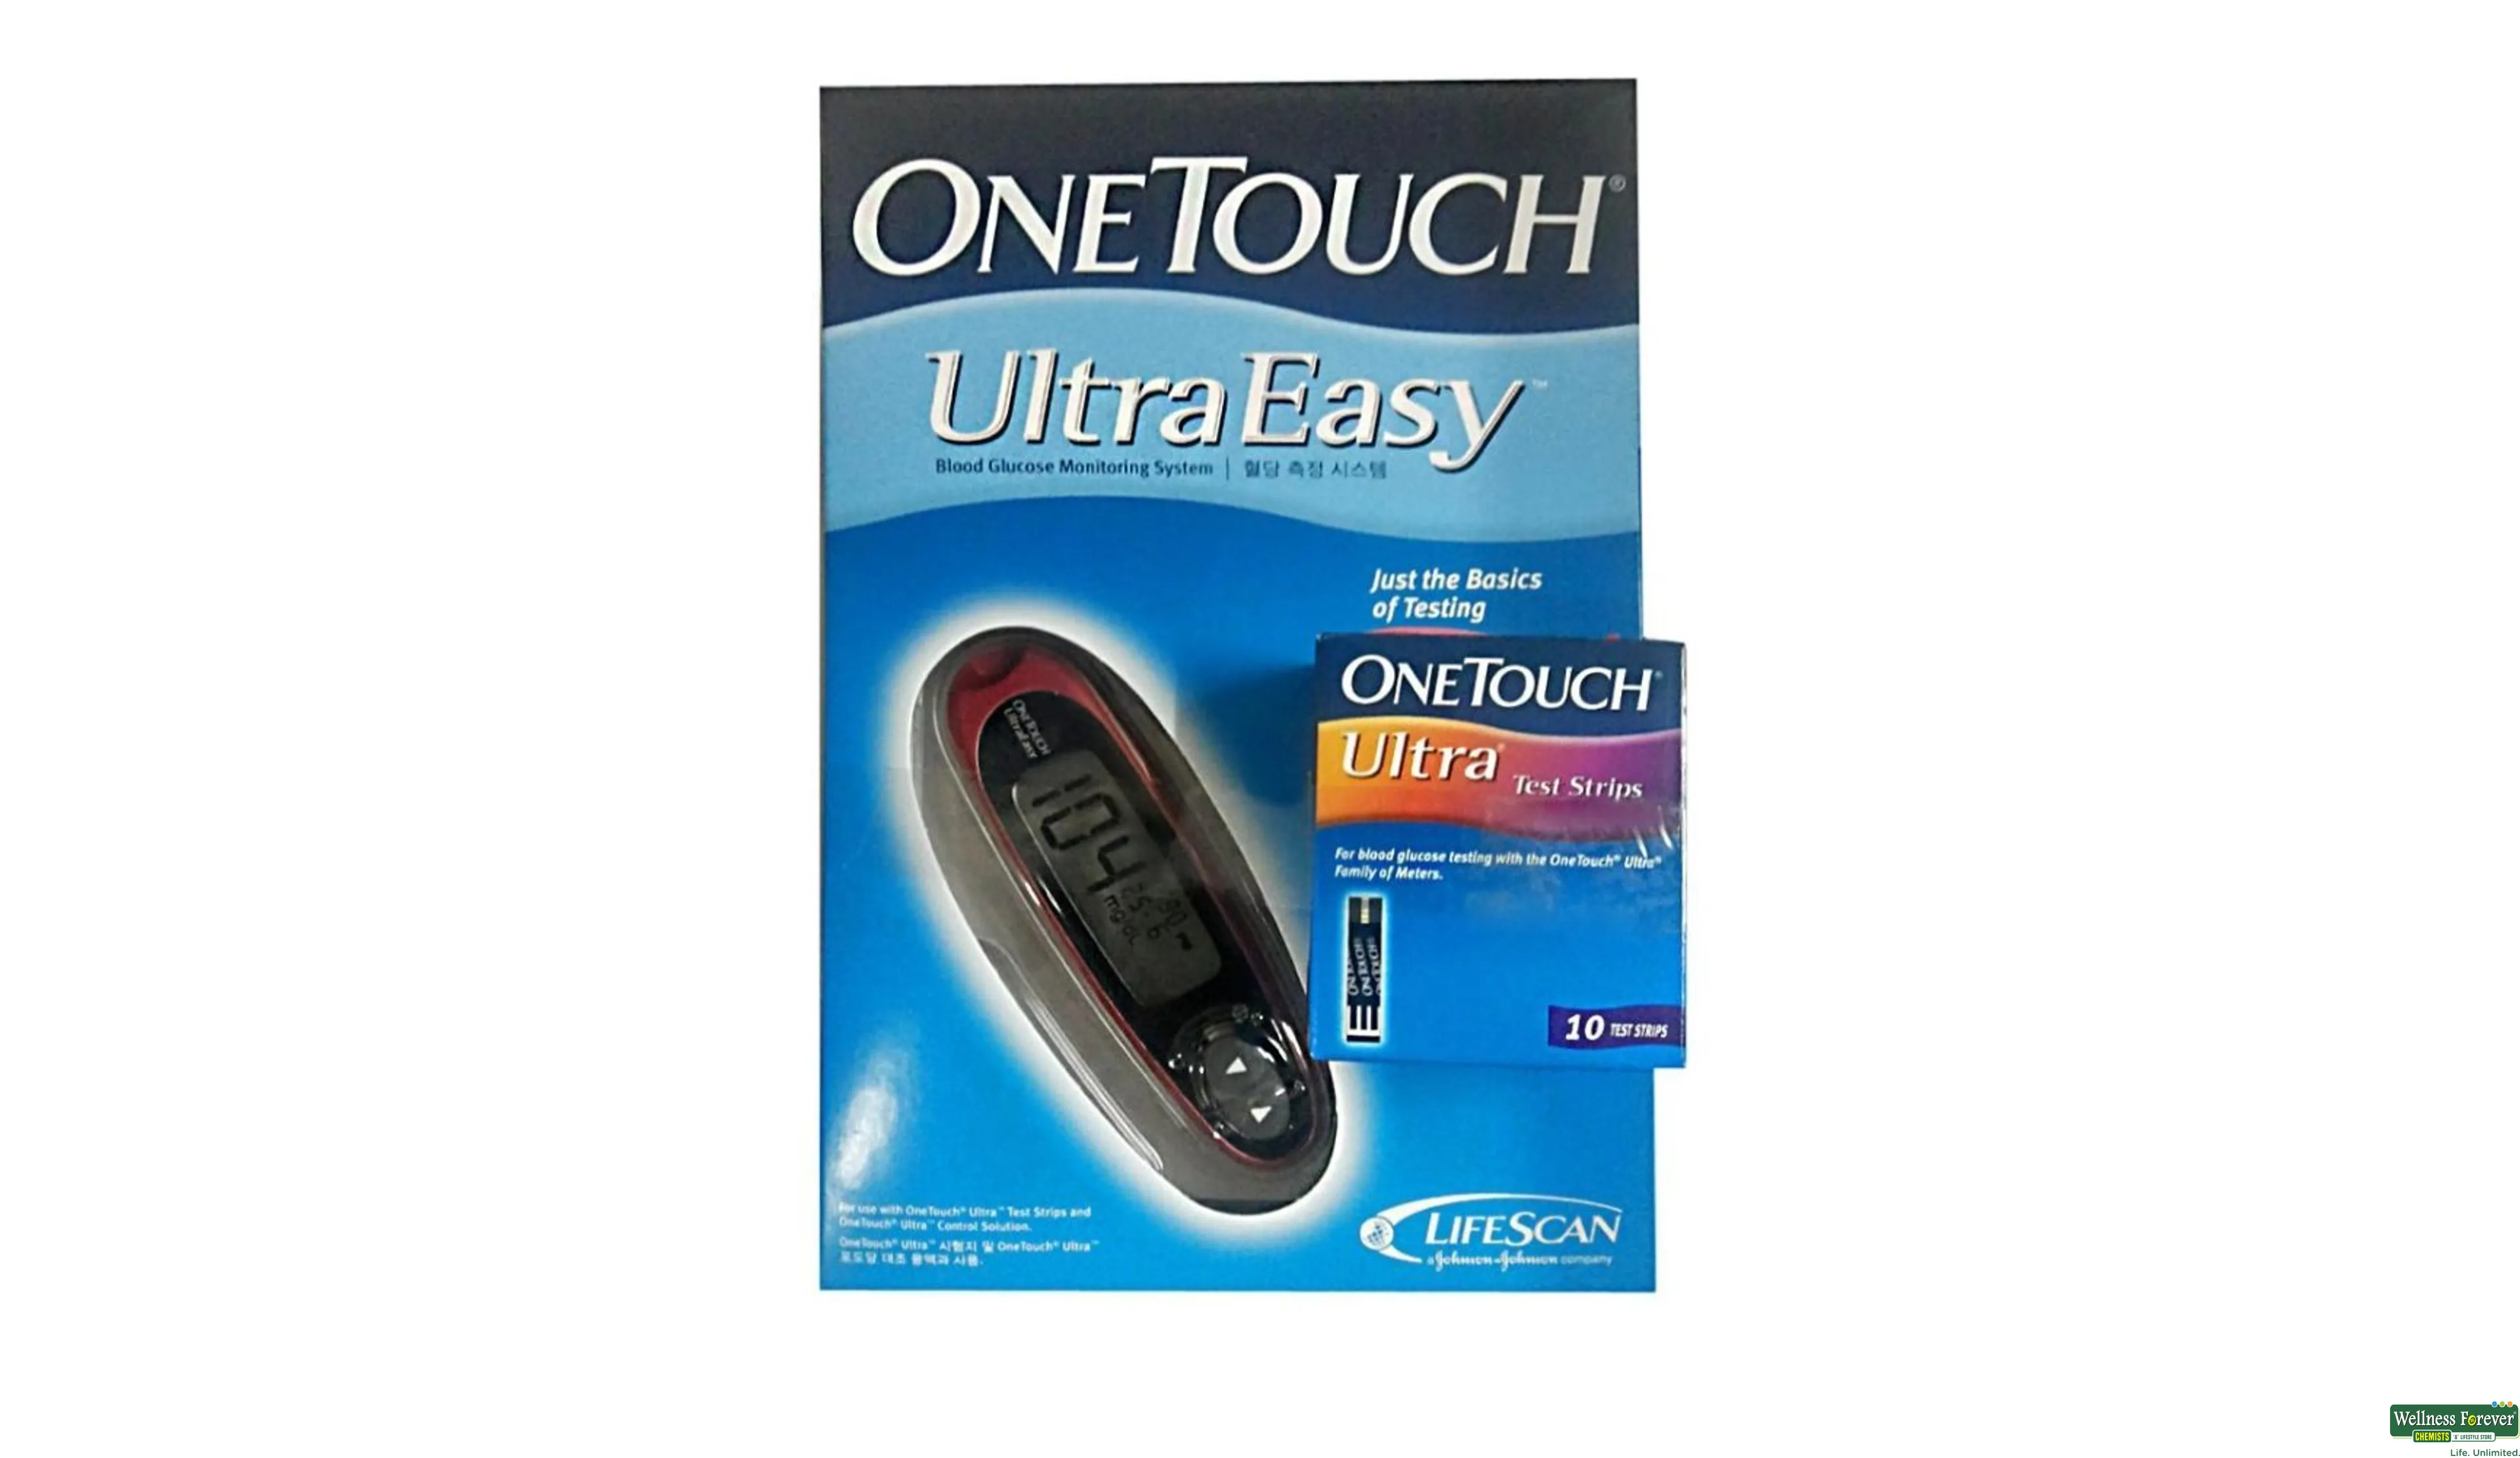 OneTouch Ultra Control Solution by Lifescan